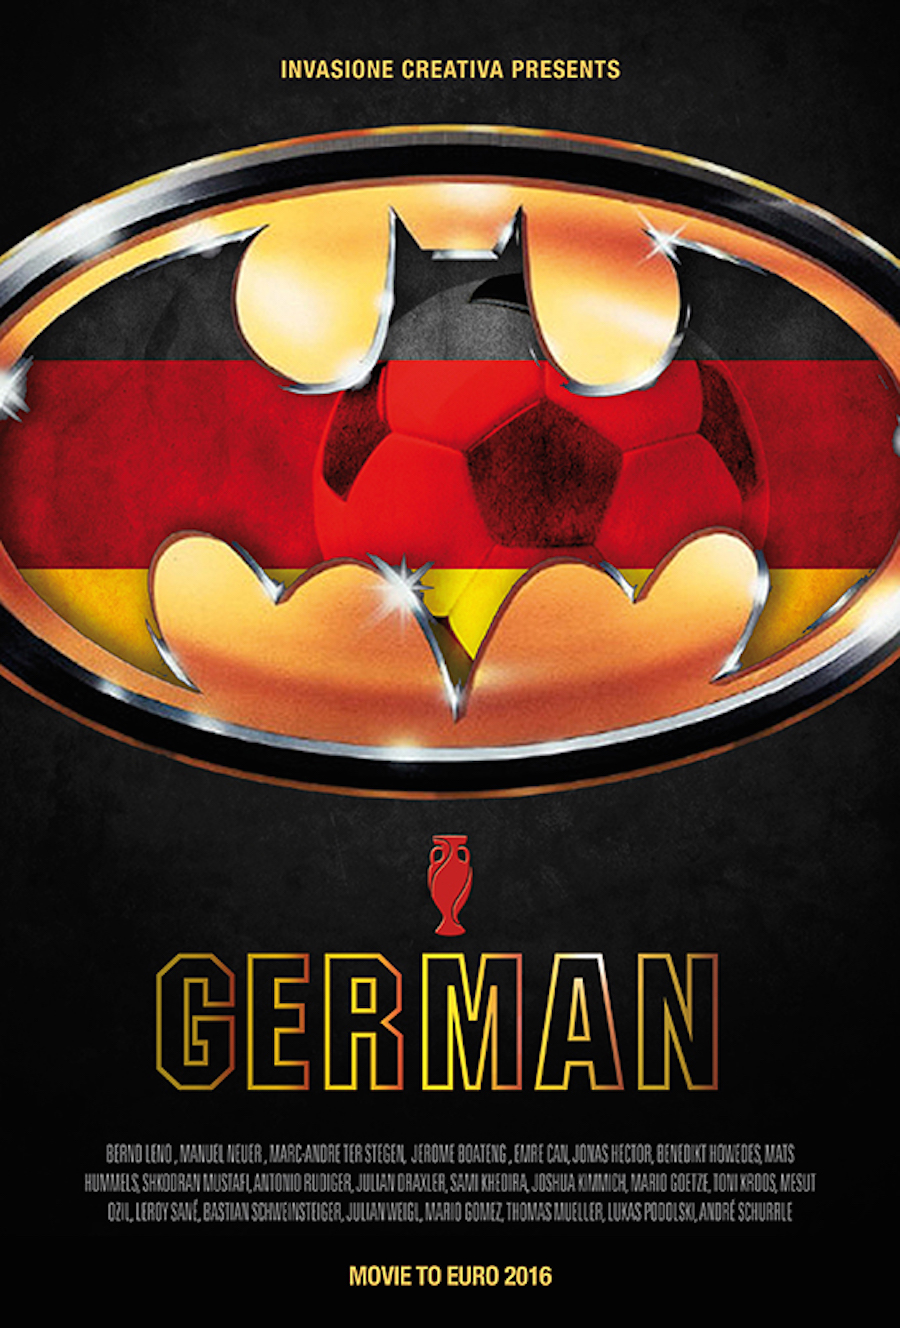 Movie Posters Revisited with Euro 2016 Teams7